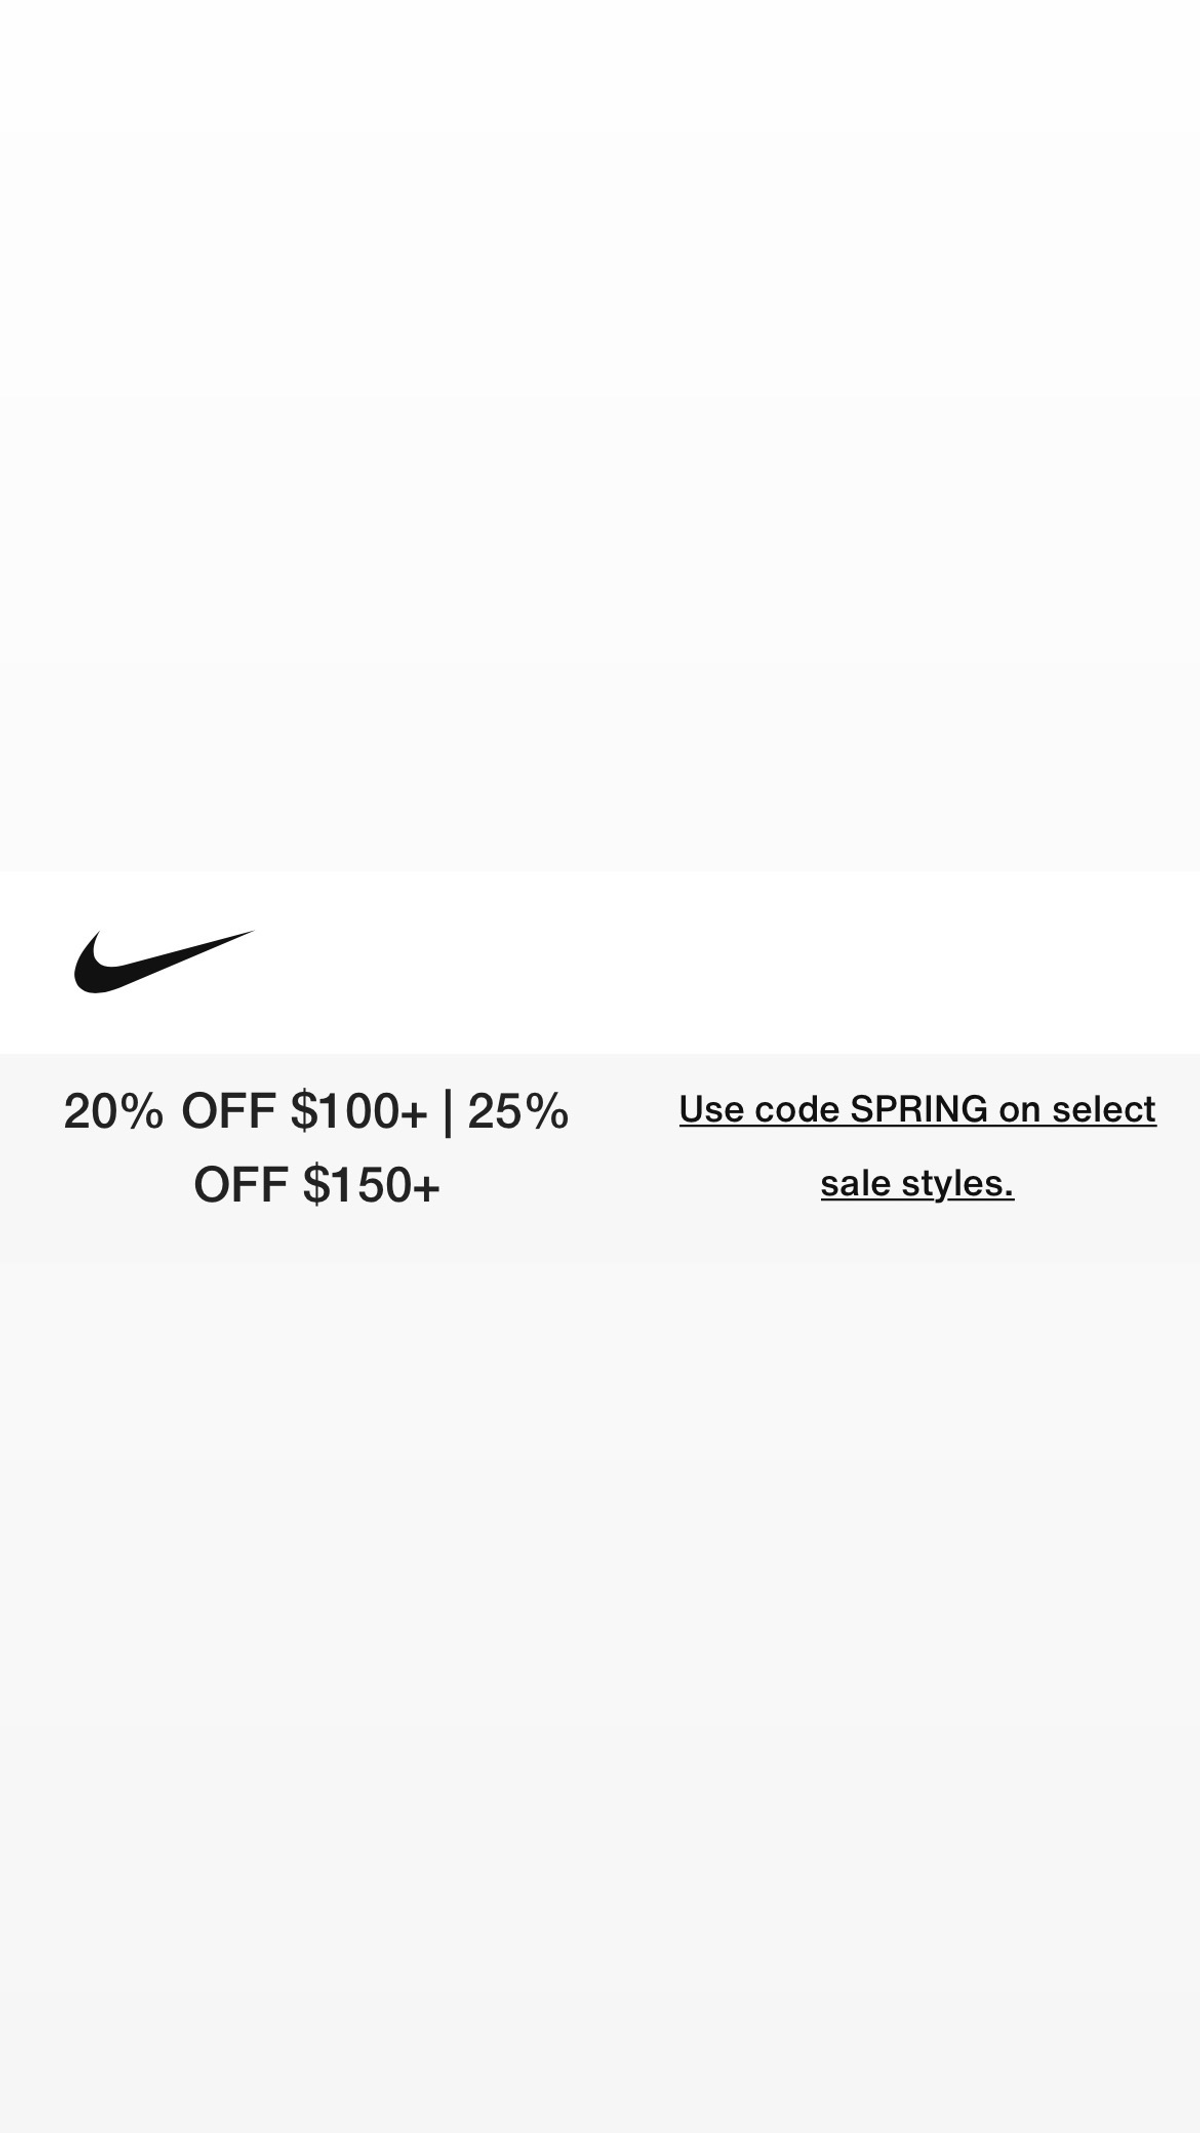 Hurry! Nike Is Offering Up To 25% Off On Select Styles Until March 26th, 2023